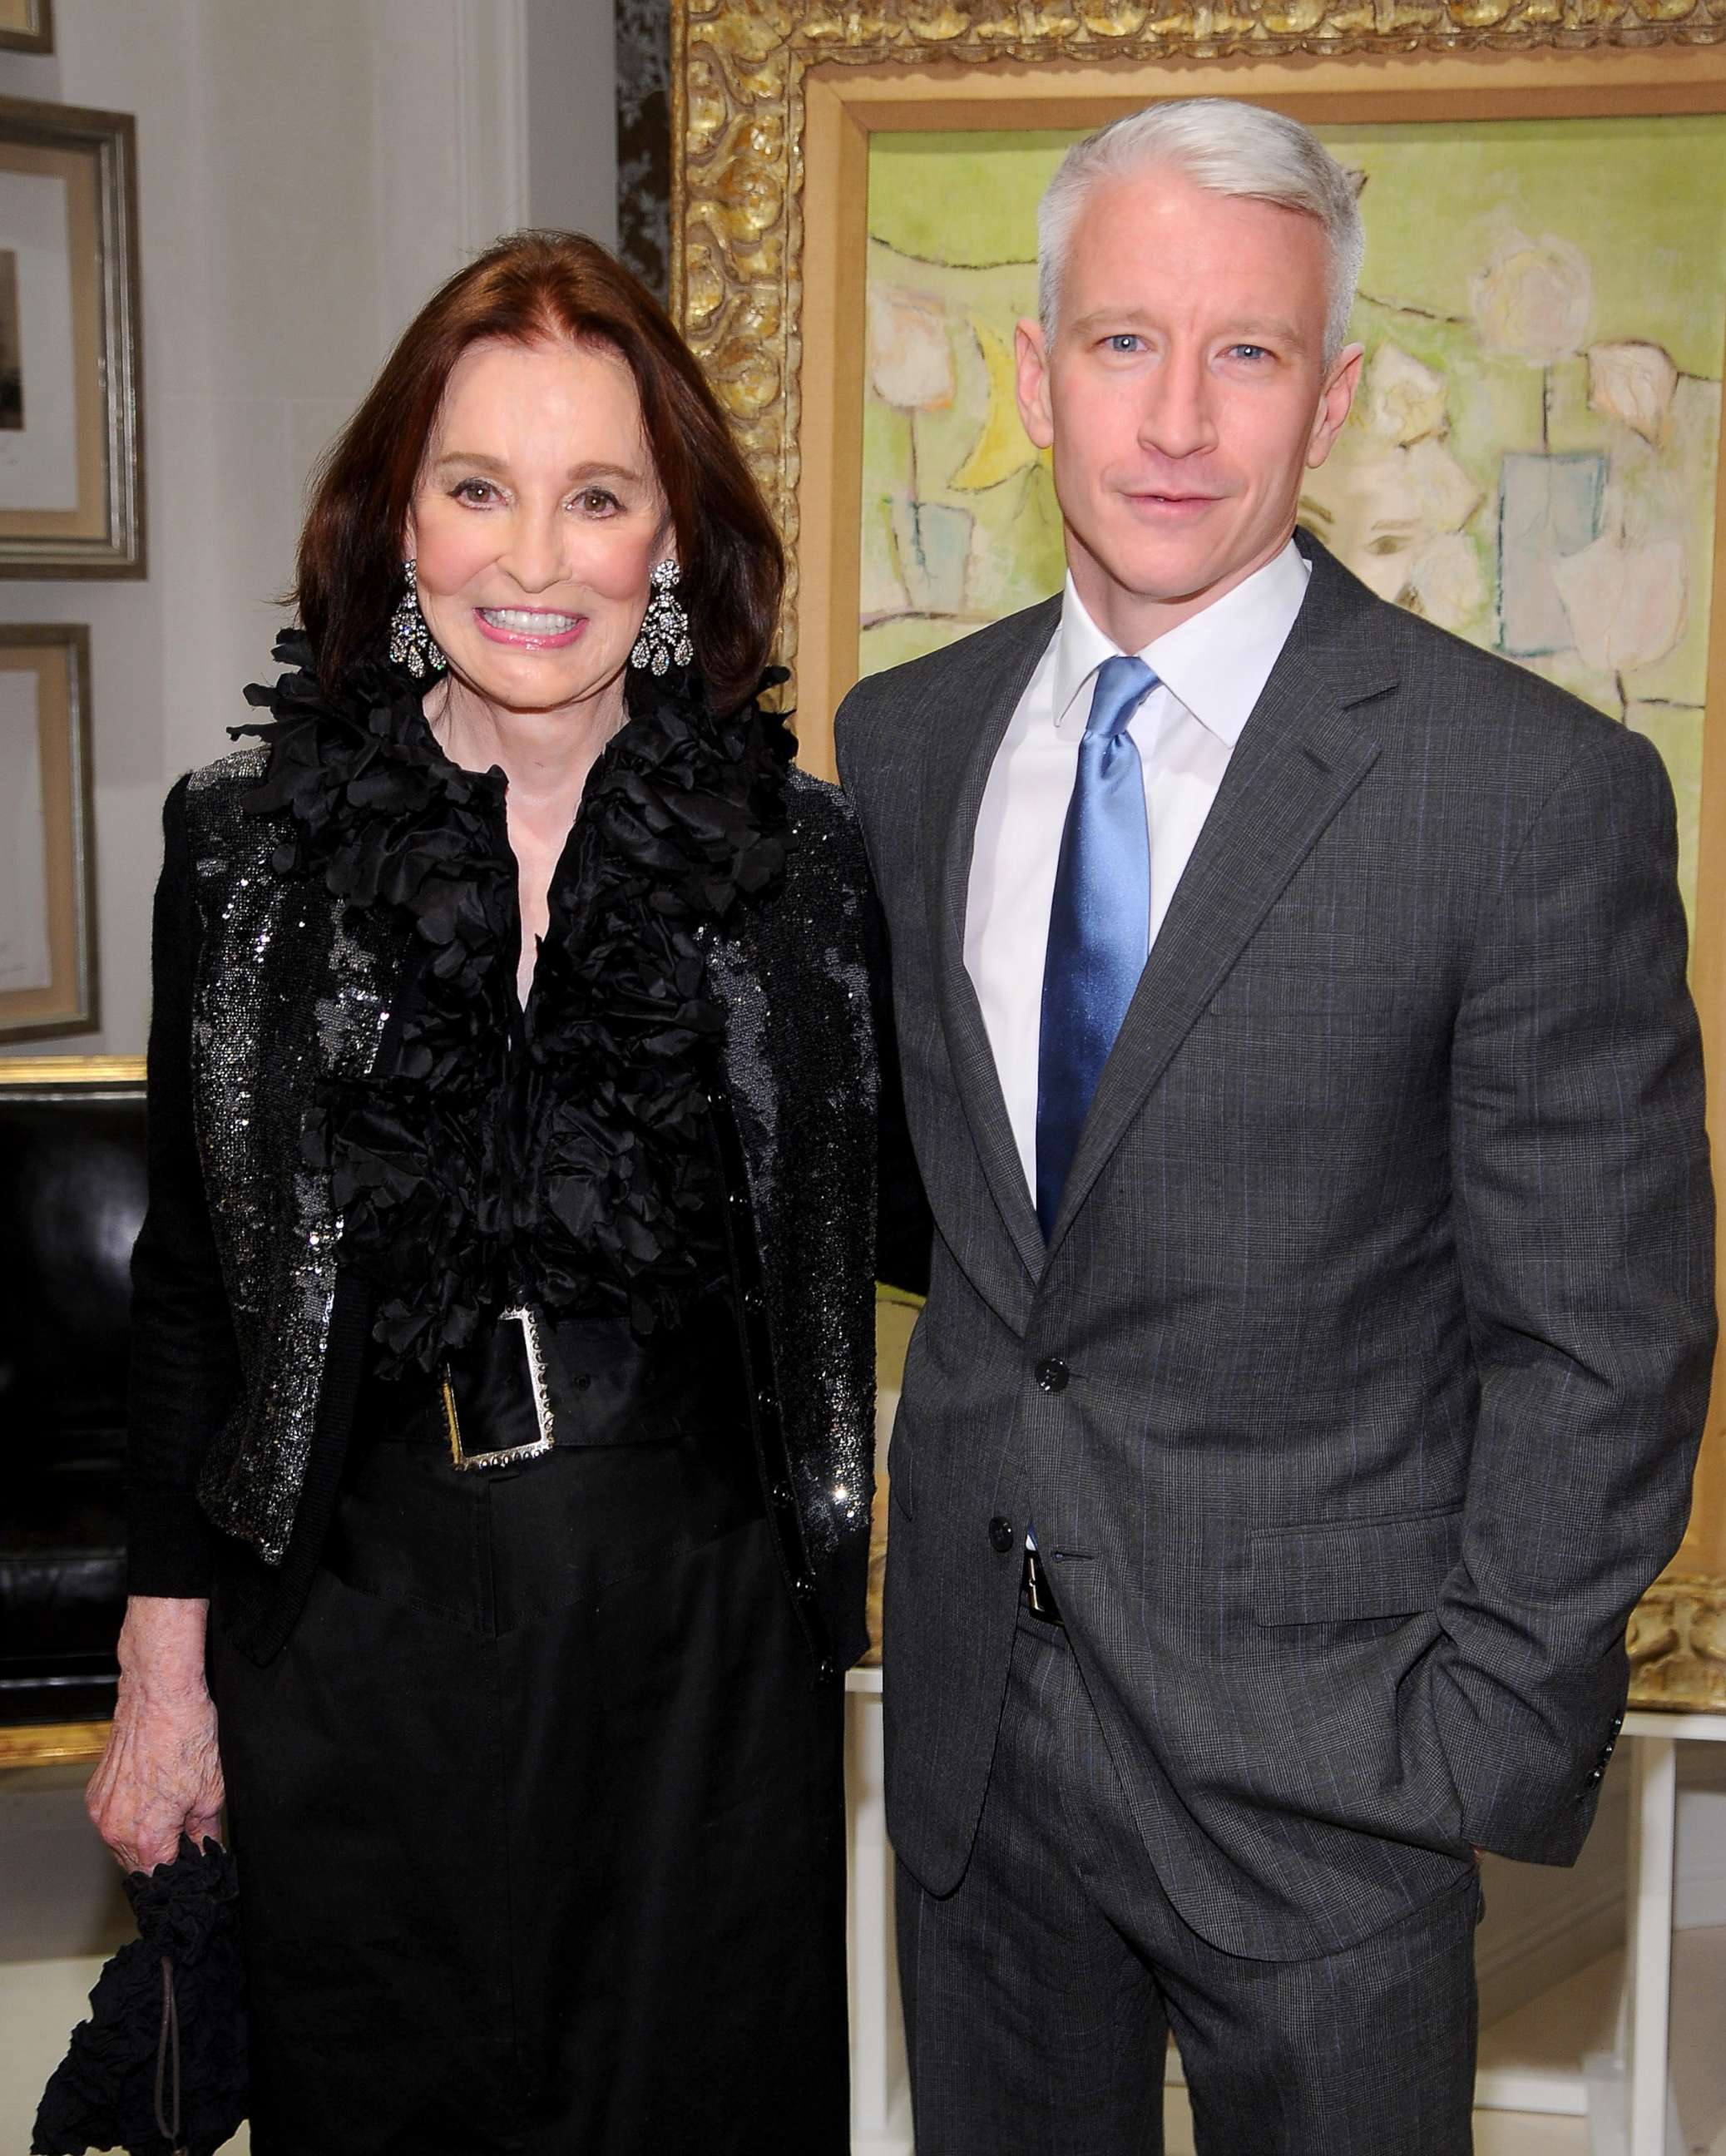 PHOTO: Gloria Vanderbilt and Anderson Cooper attend the launch party for "The World Of Gloria Vanderbilt" at the Ralph Lauren Women's Boutique, Nov. 4, 2010, in New York.